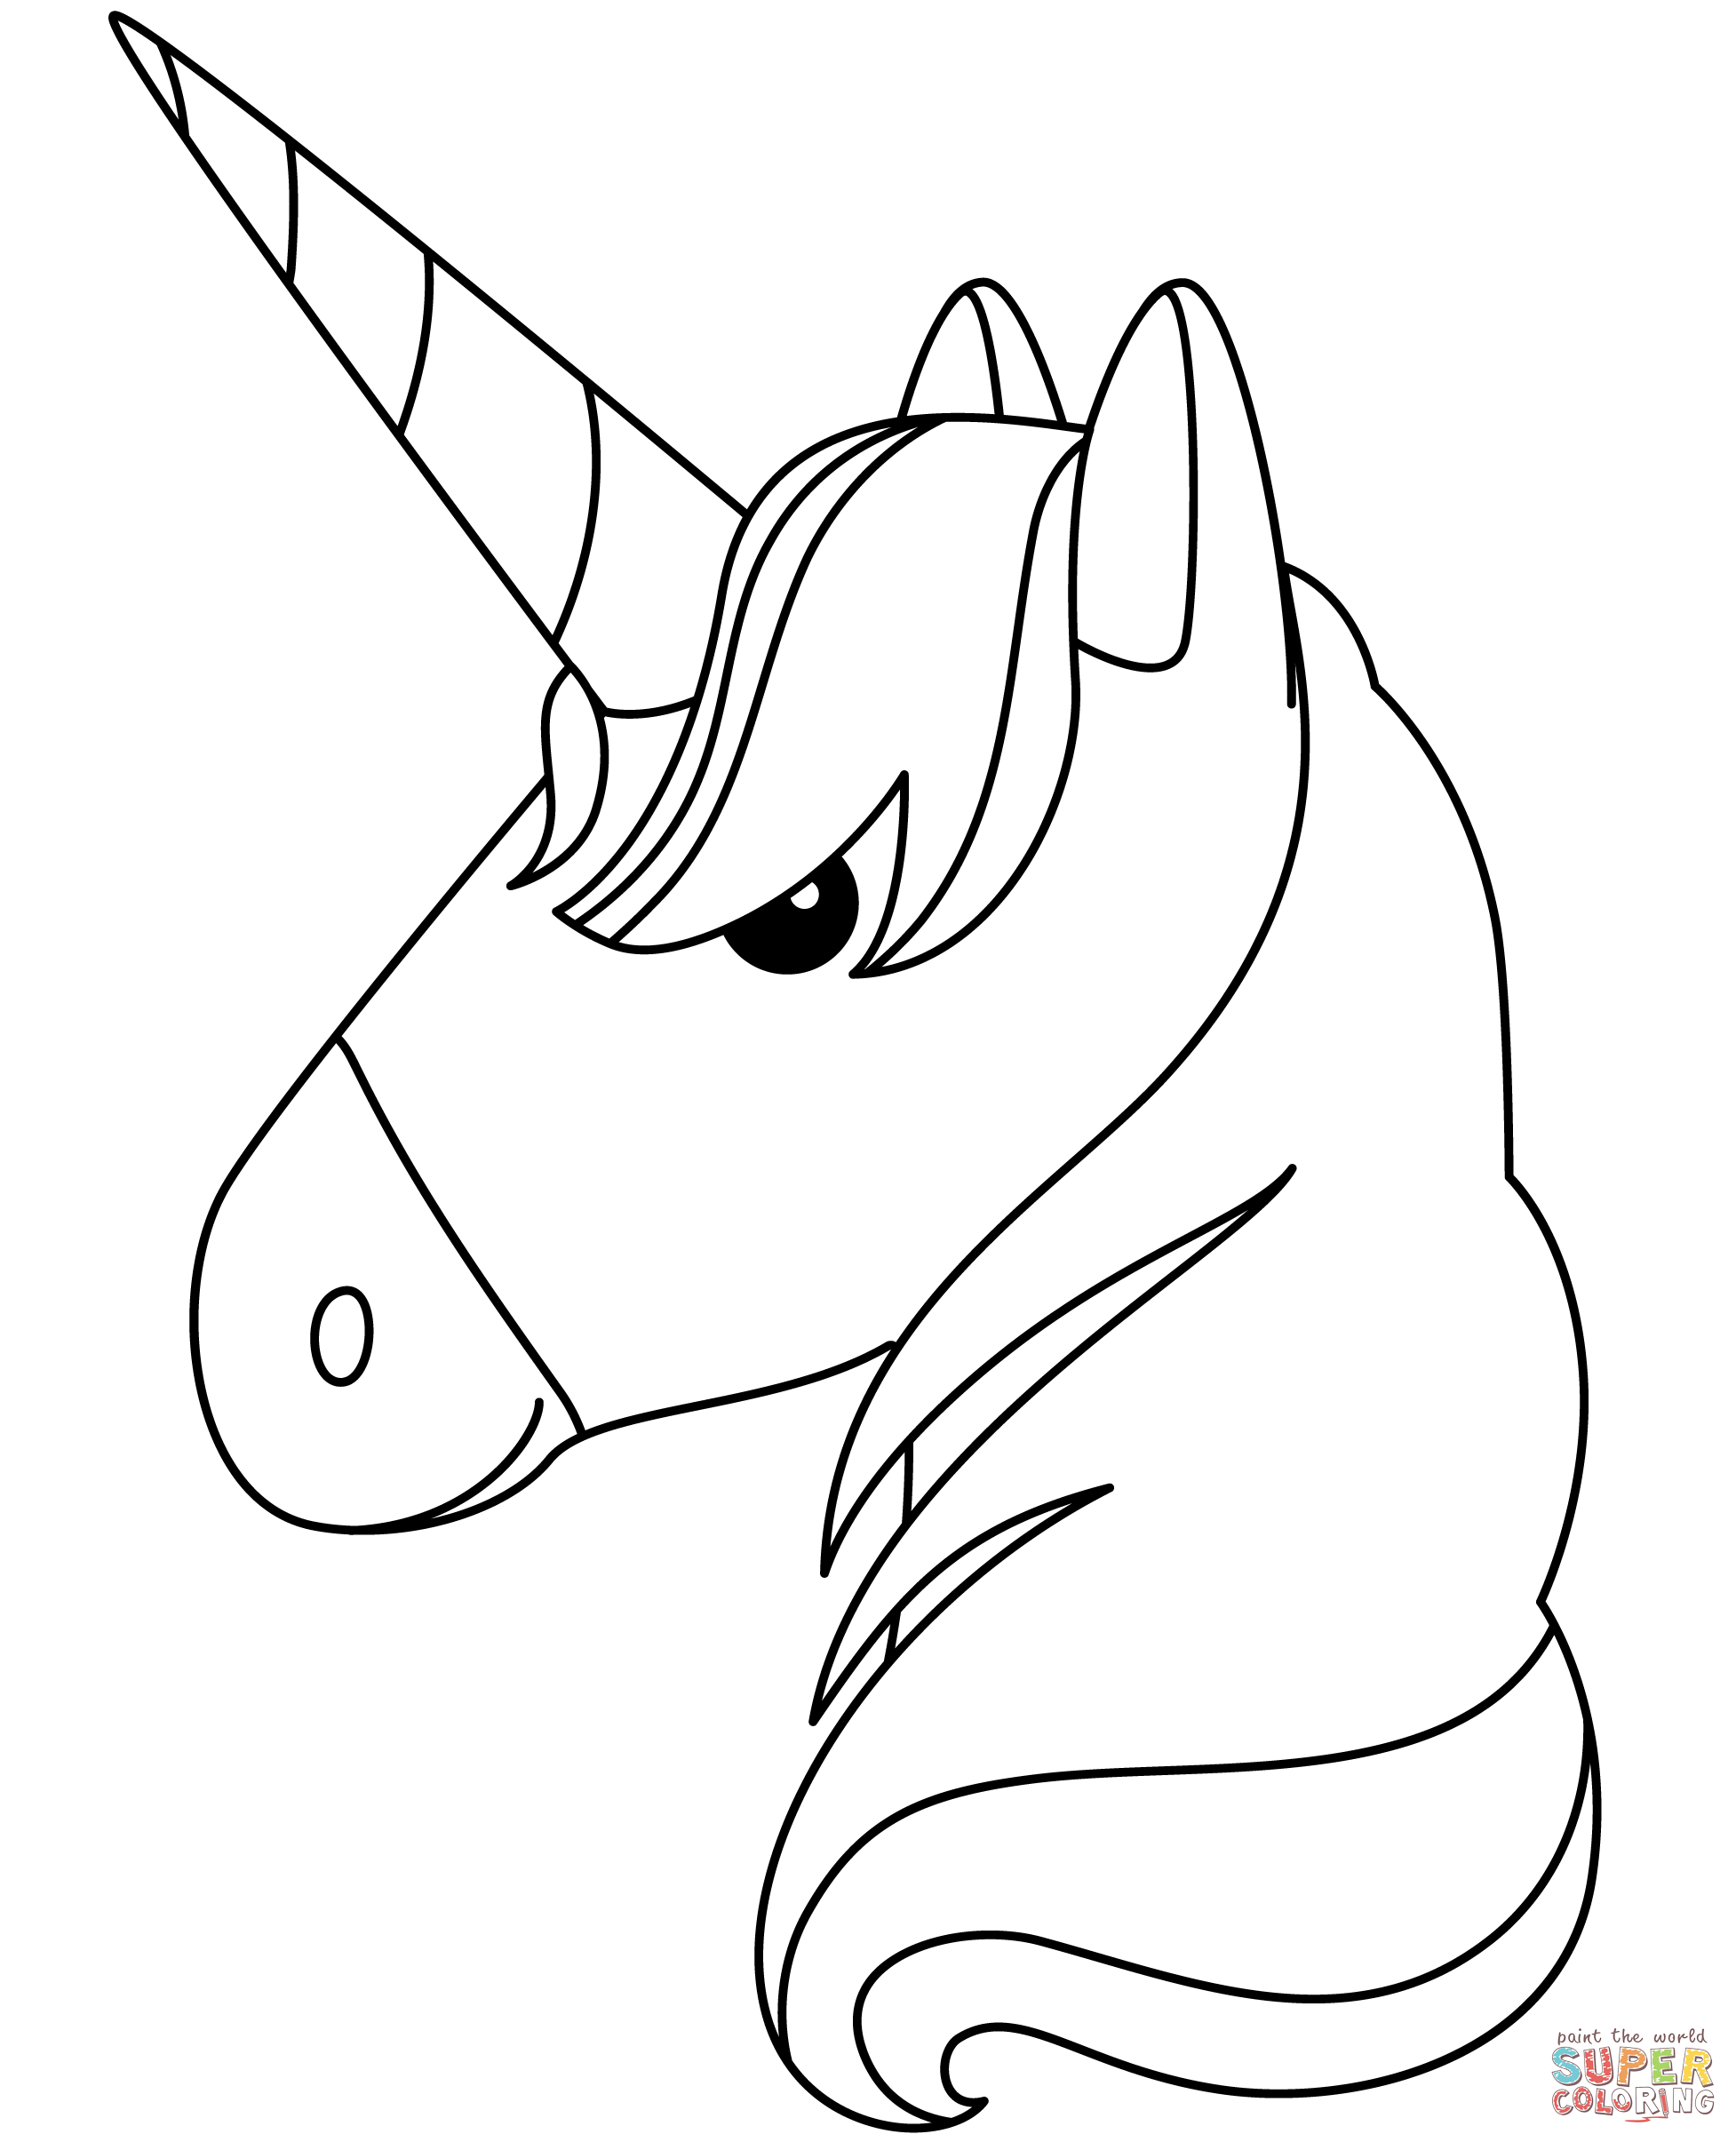 Unicorn head coloring page free printable coloring pages